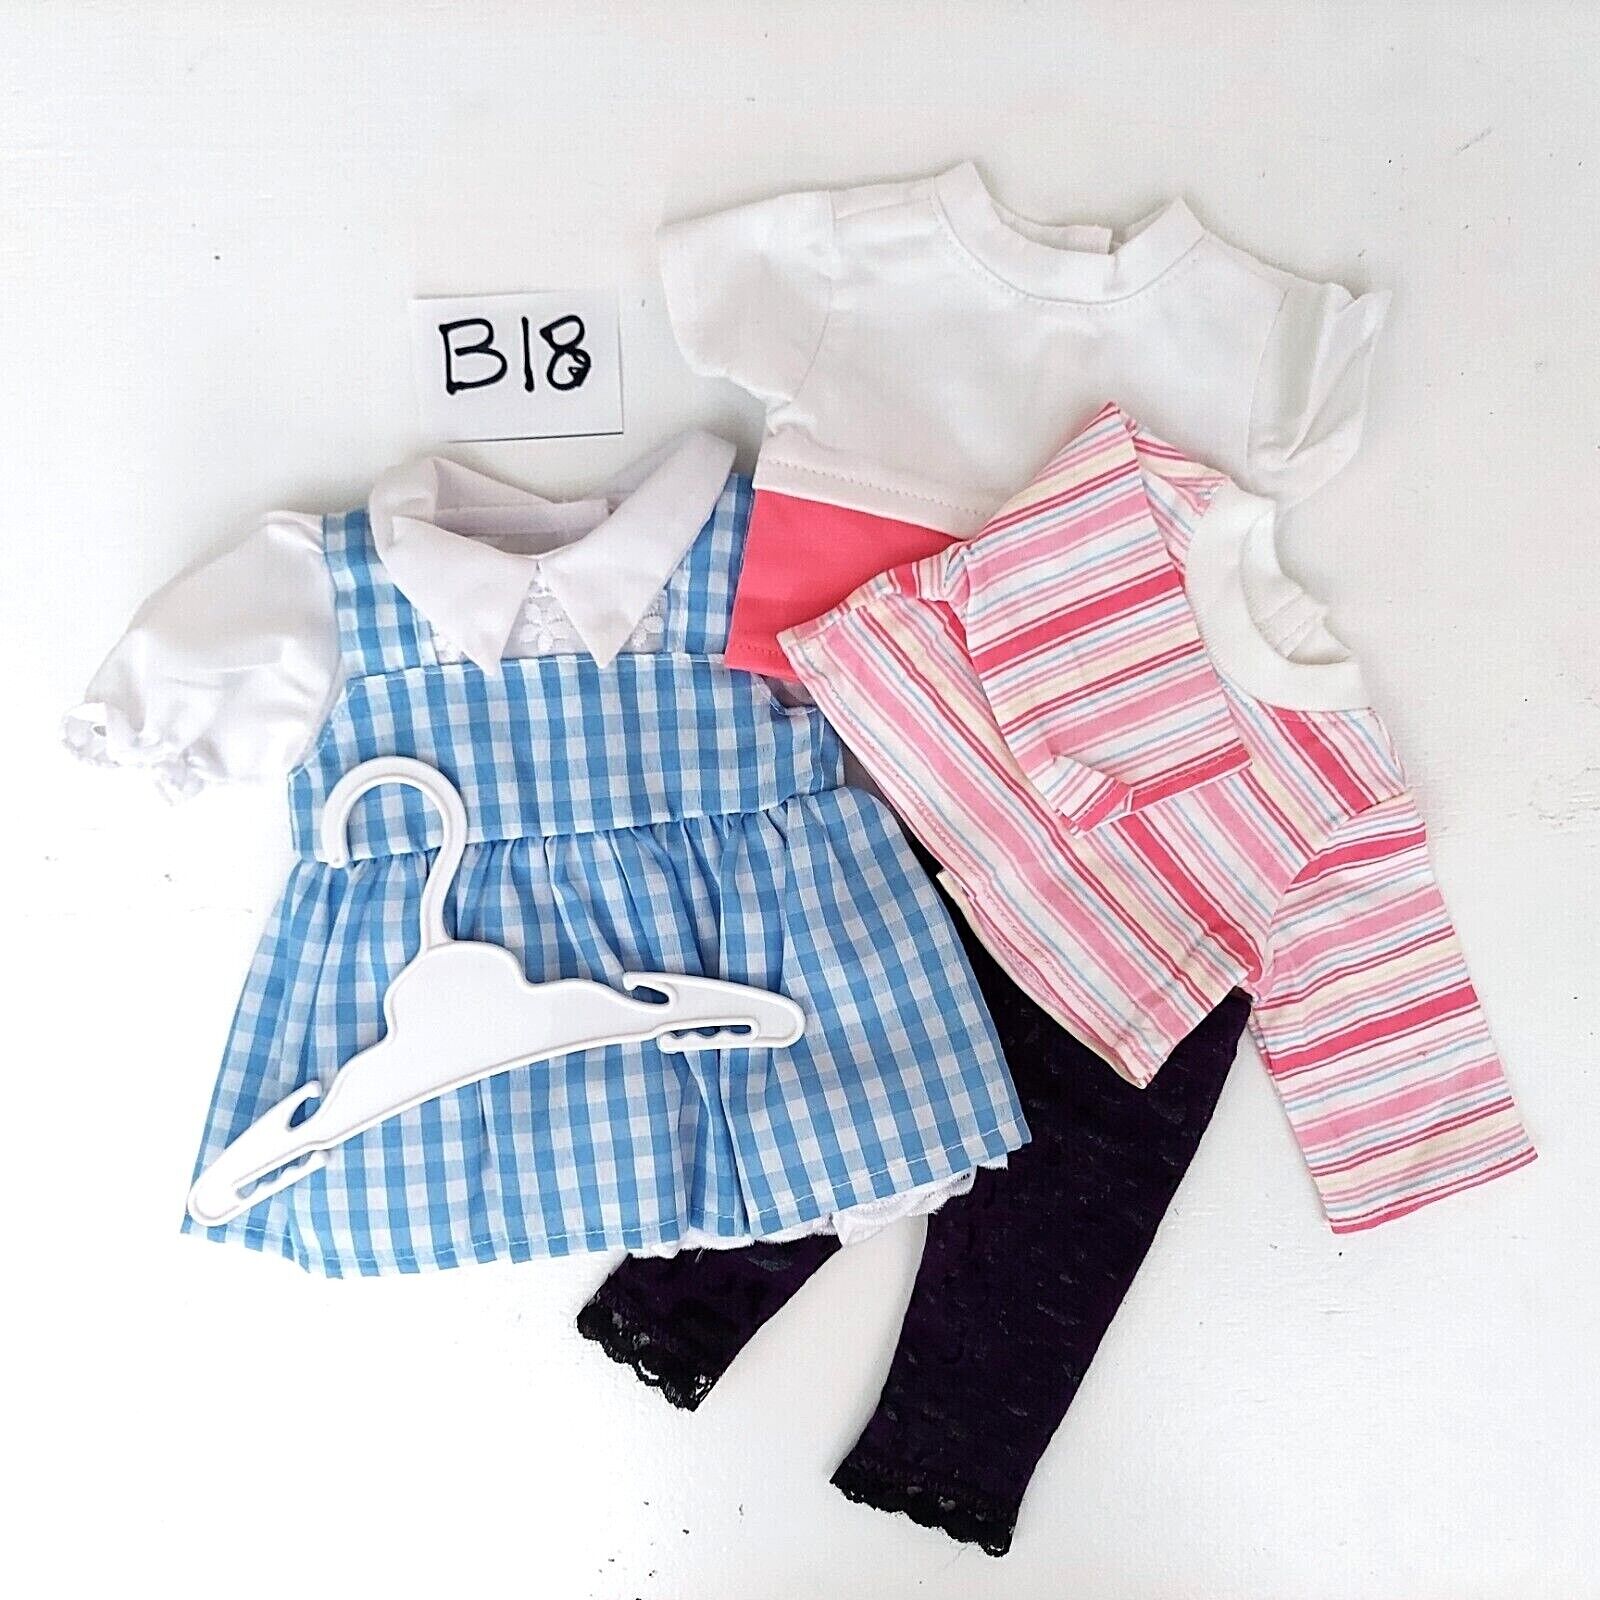 Doll Clothes # B18 fits 15 inch American Girl Bity.Lot american doll clothing does not apply